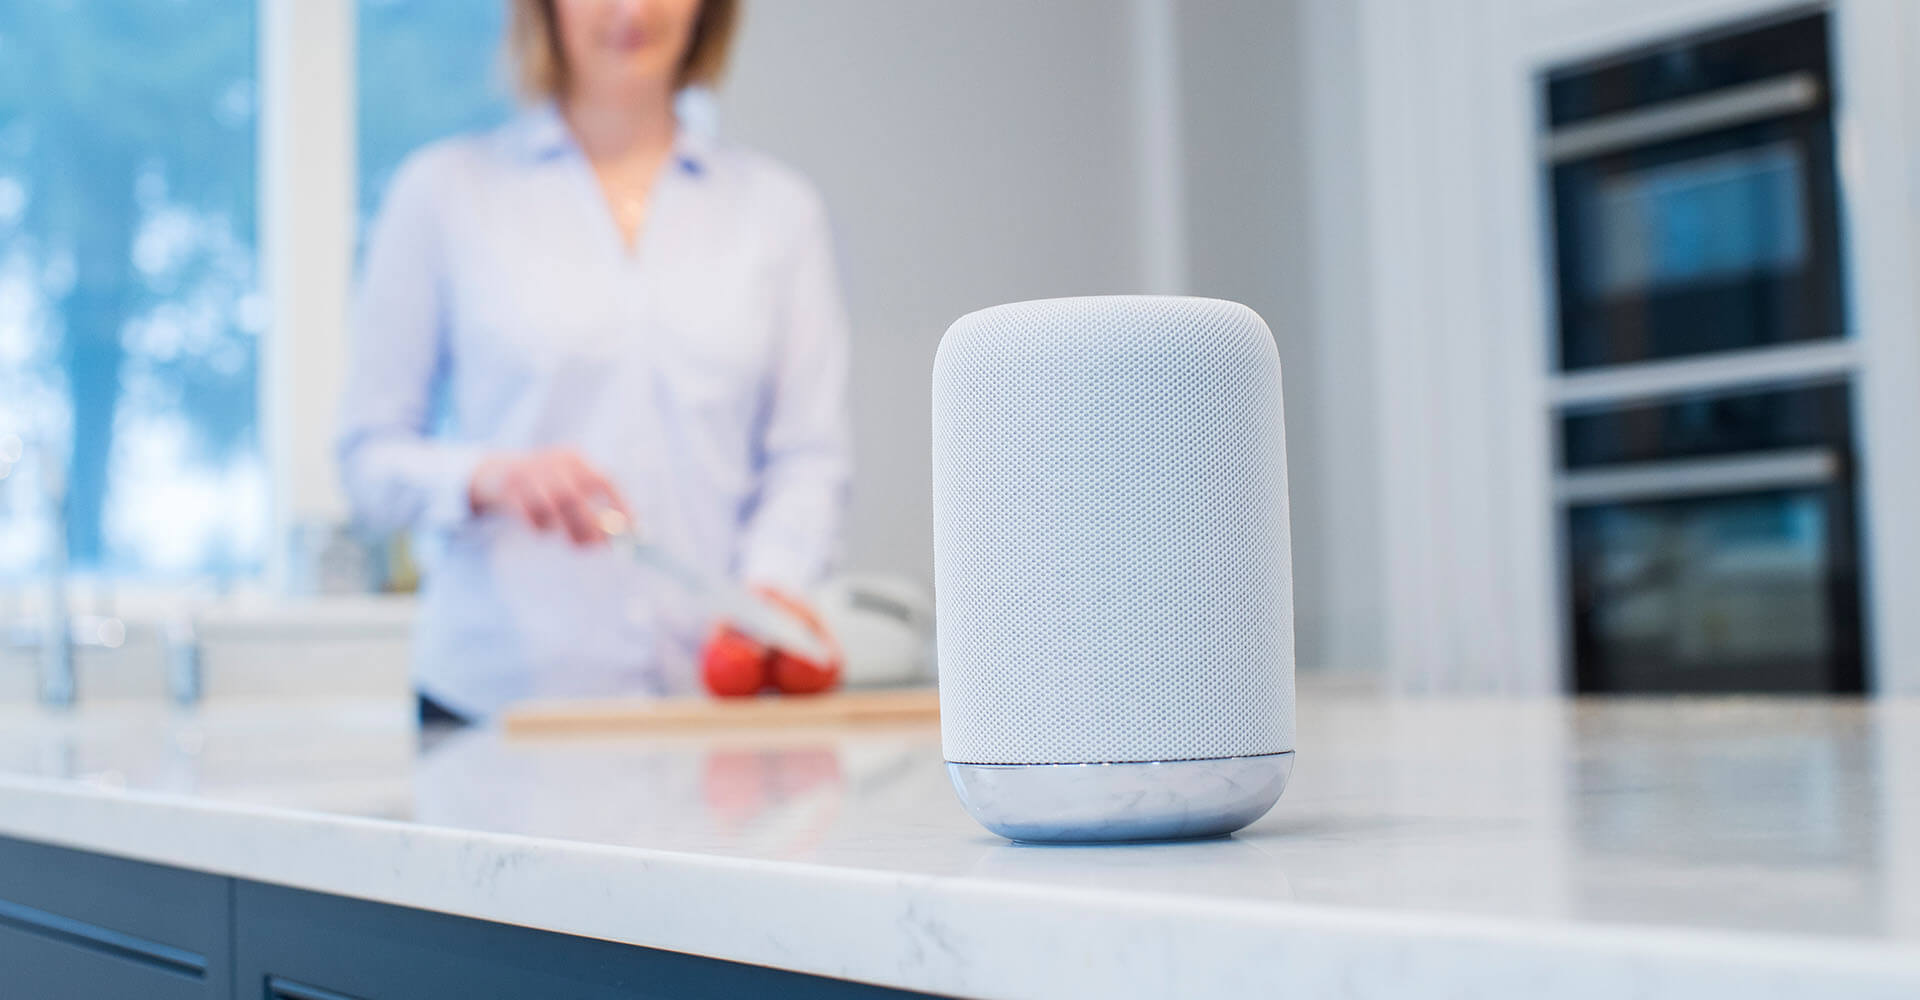 Woman in the kitchen in the background - in the foreground a smart speaker